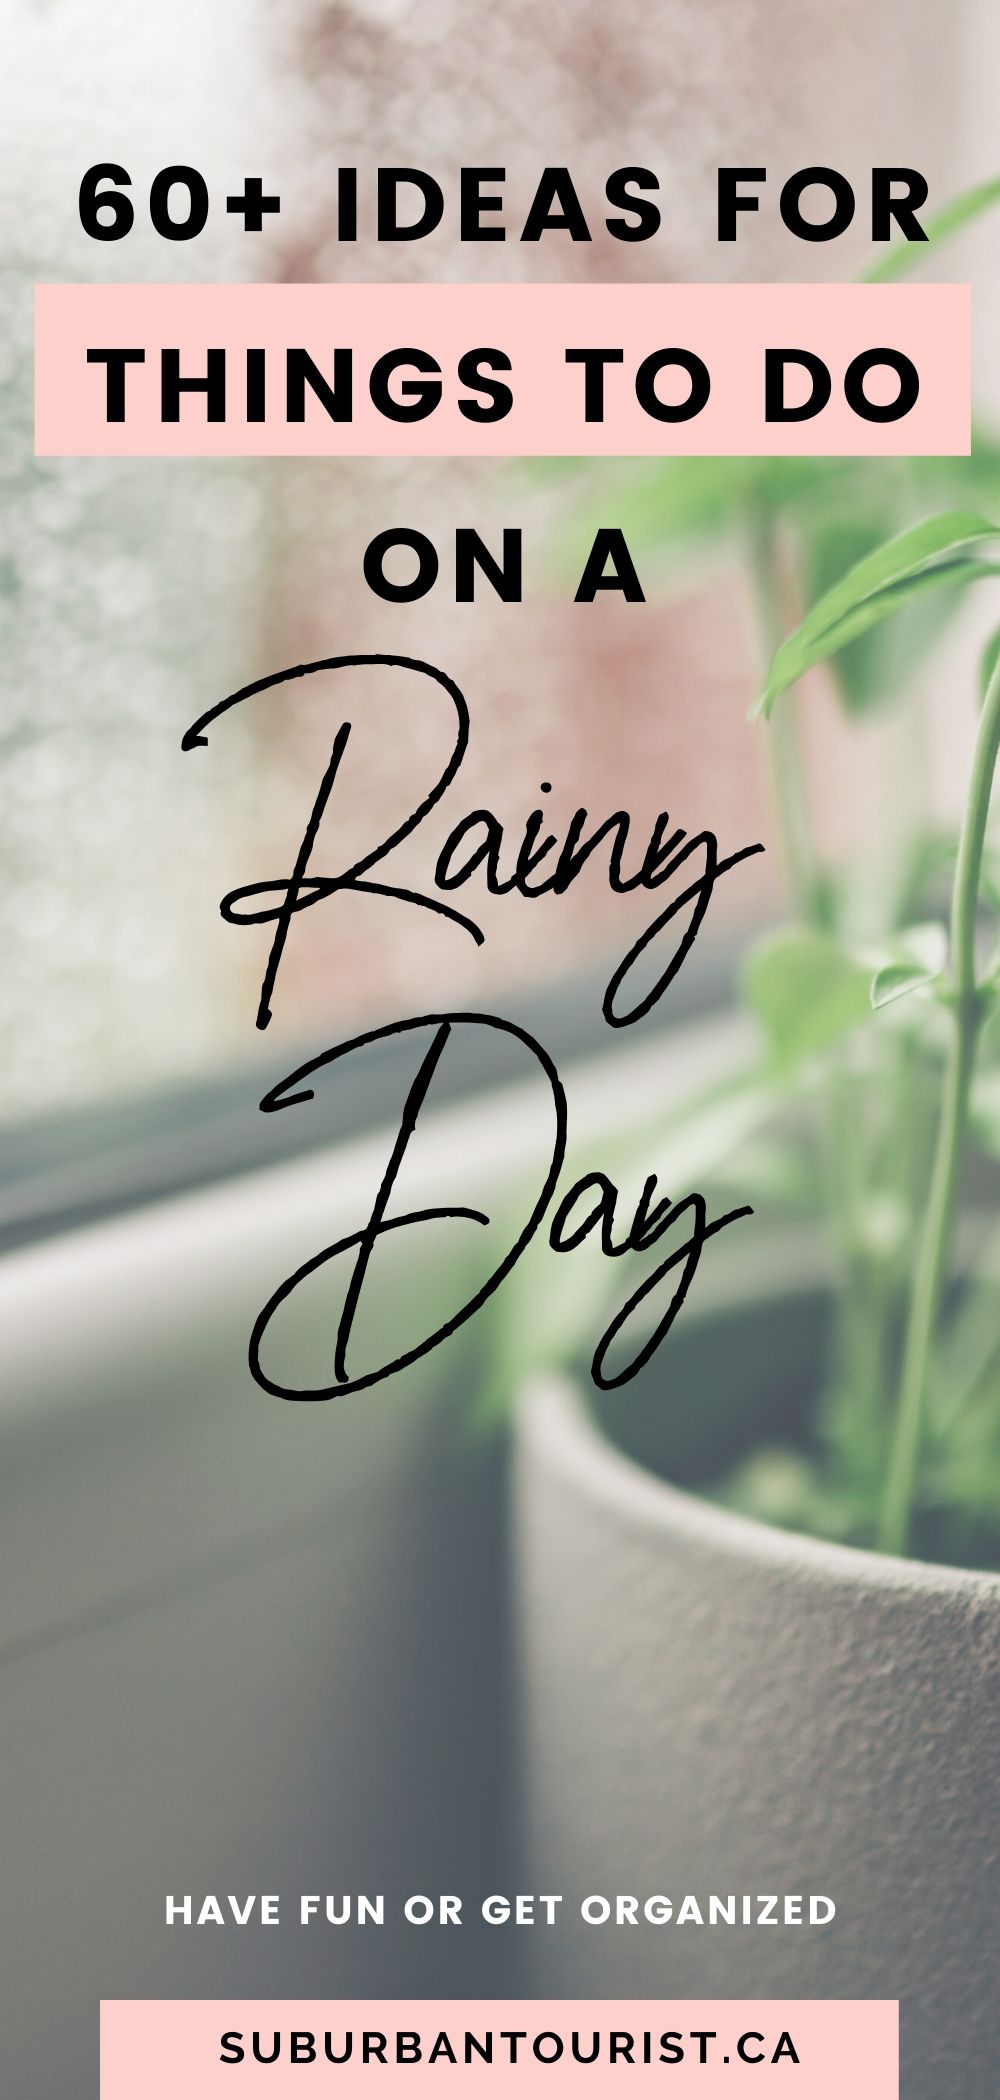 100 Things to Do on a Rainy Day for Adults - Authentically Del